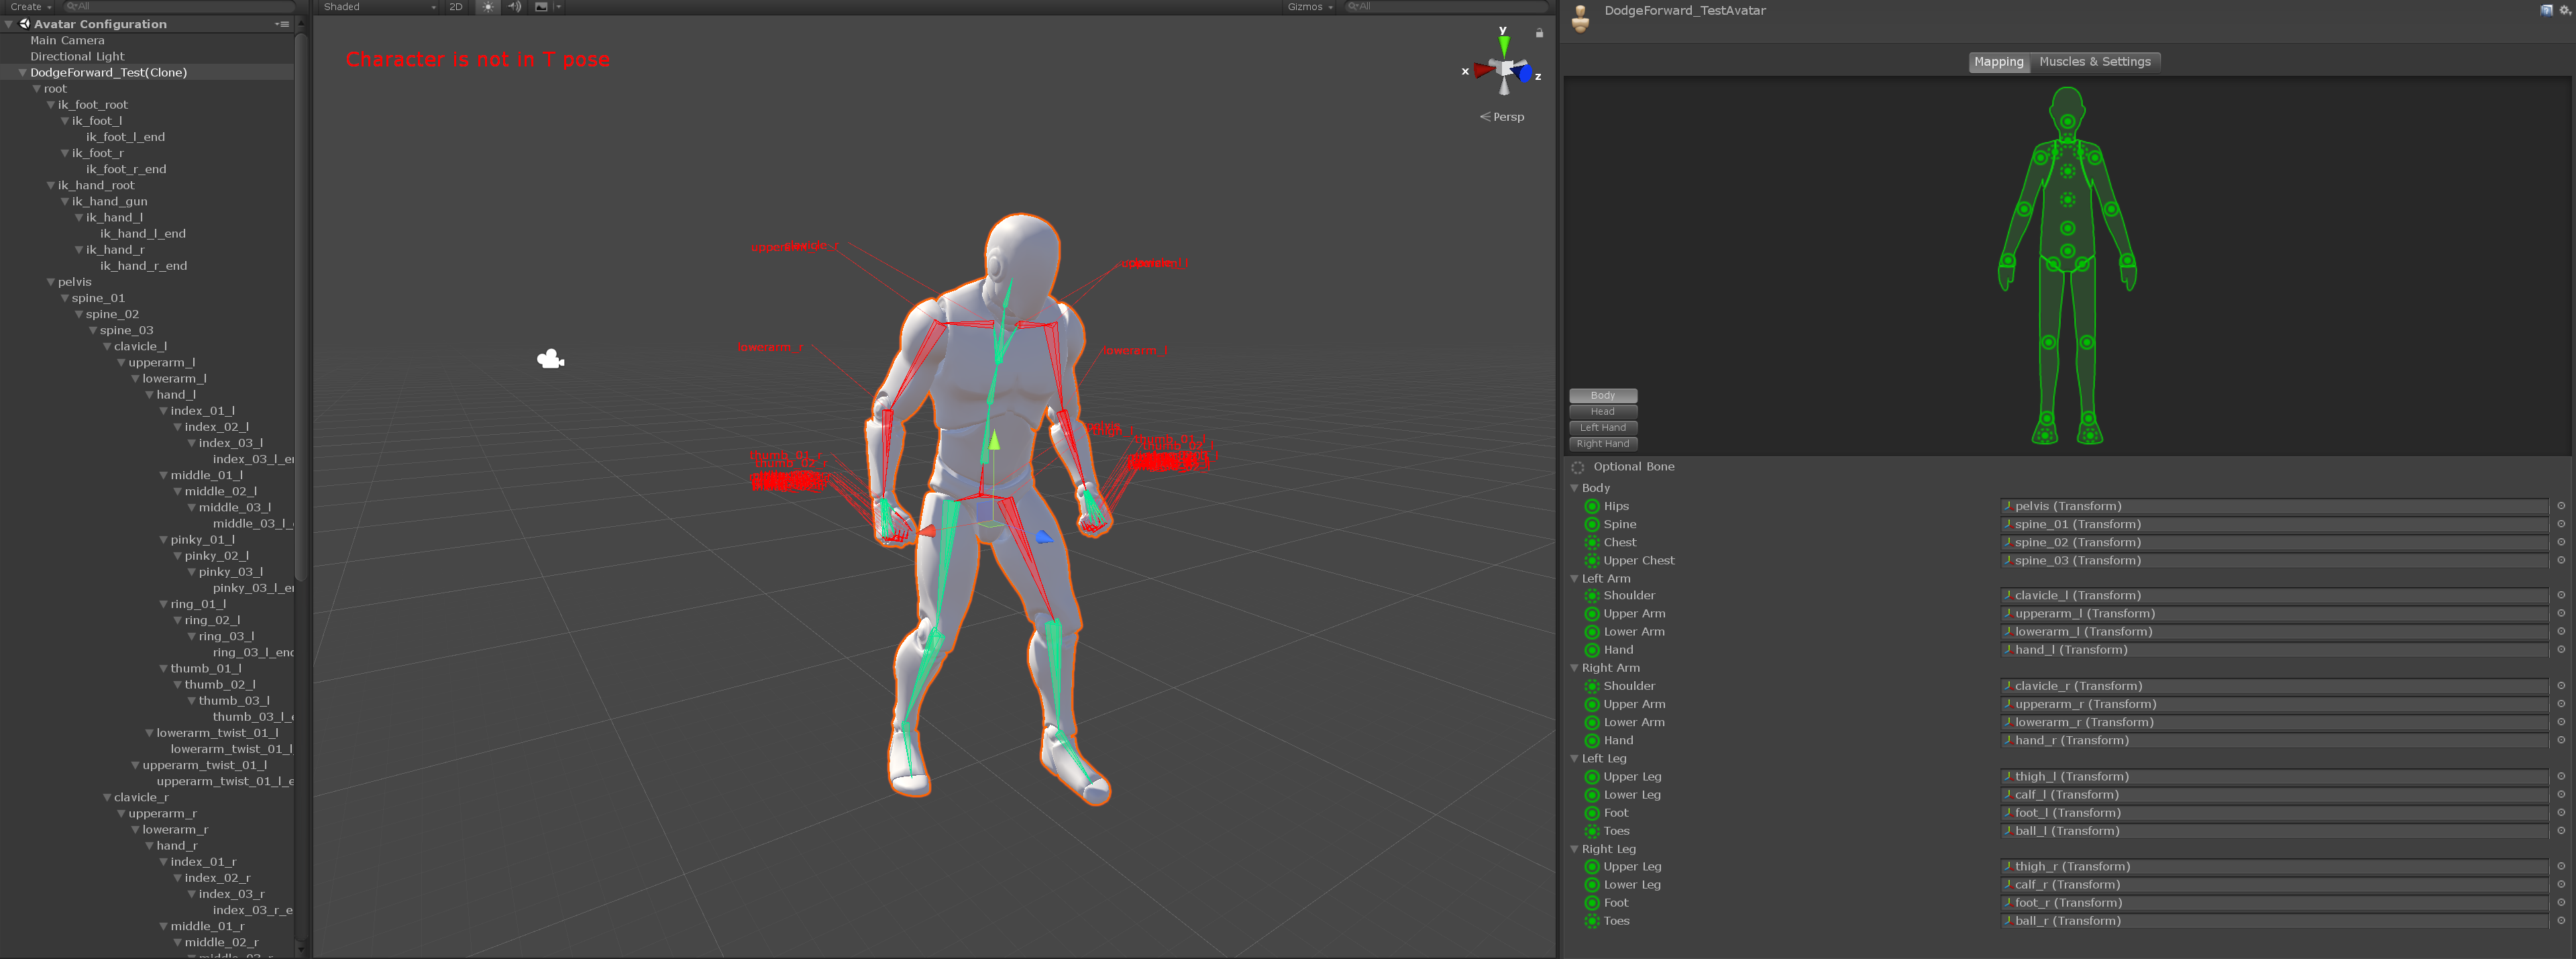 Importing Unreal Animations to Unity - Humanoid Rig Issues - Unity Forum